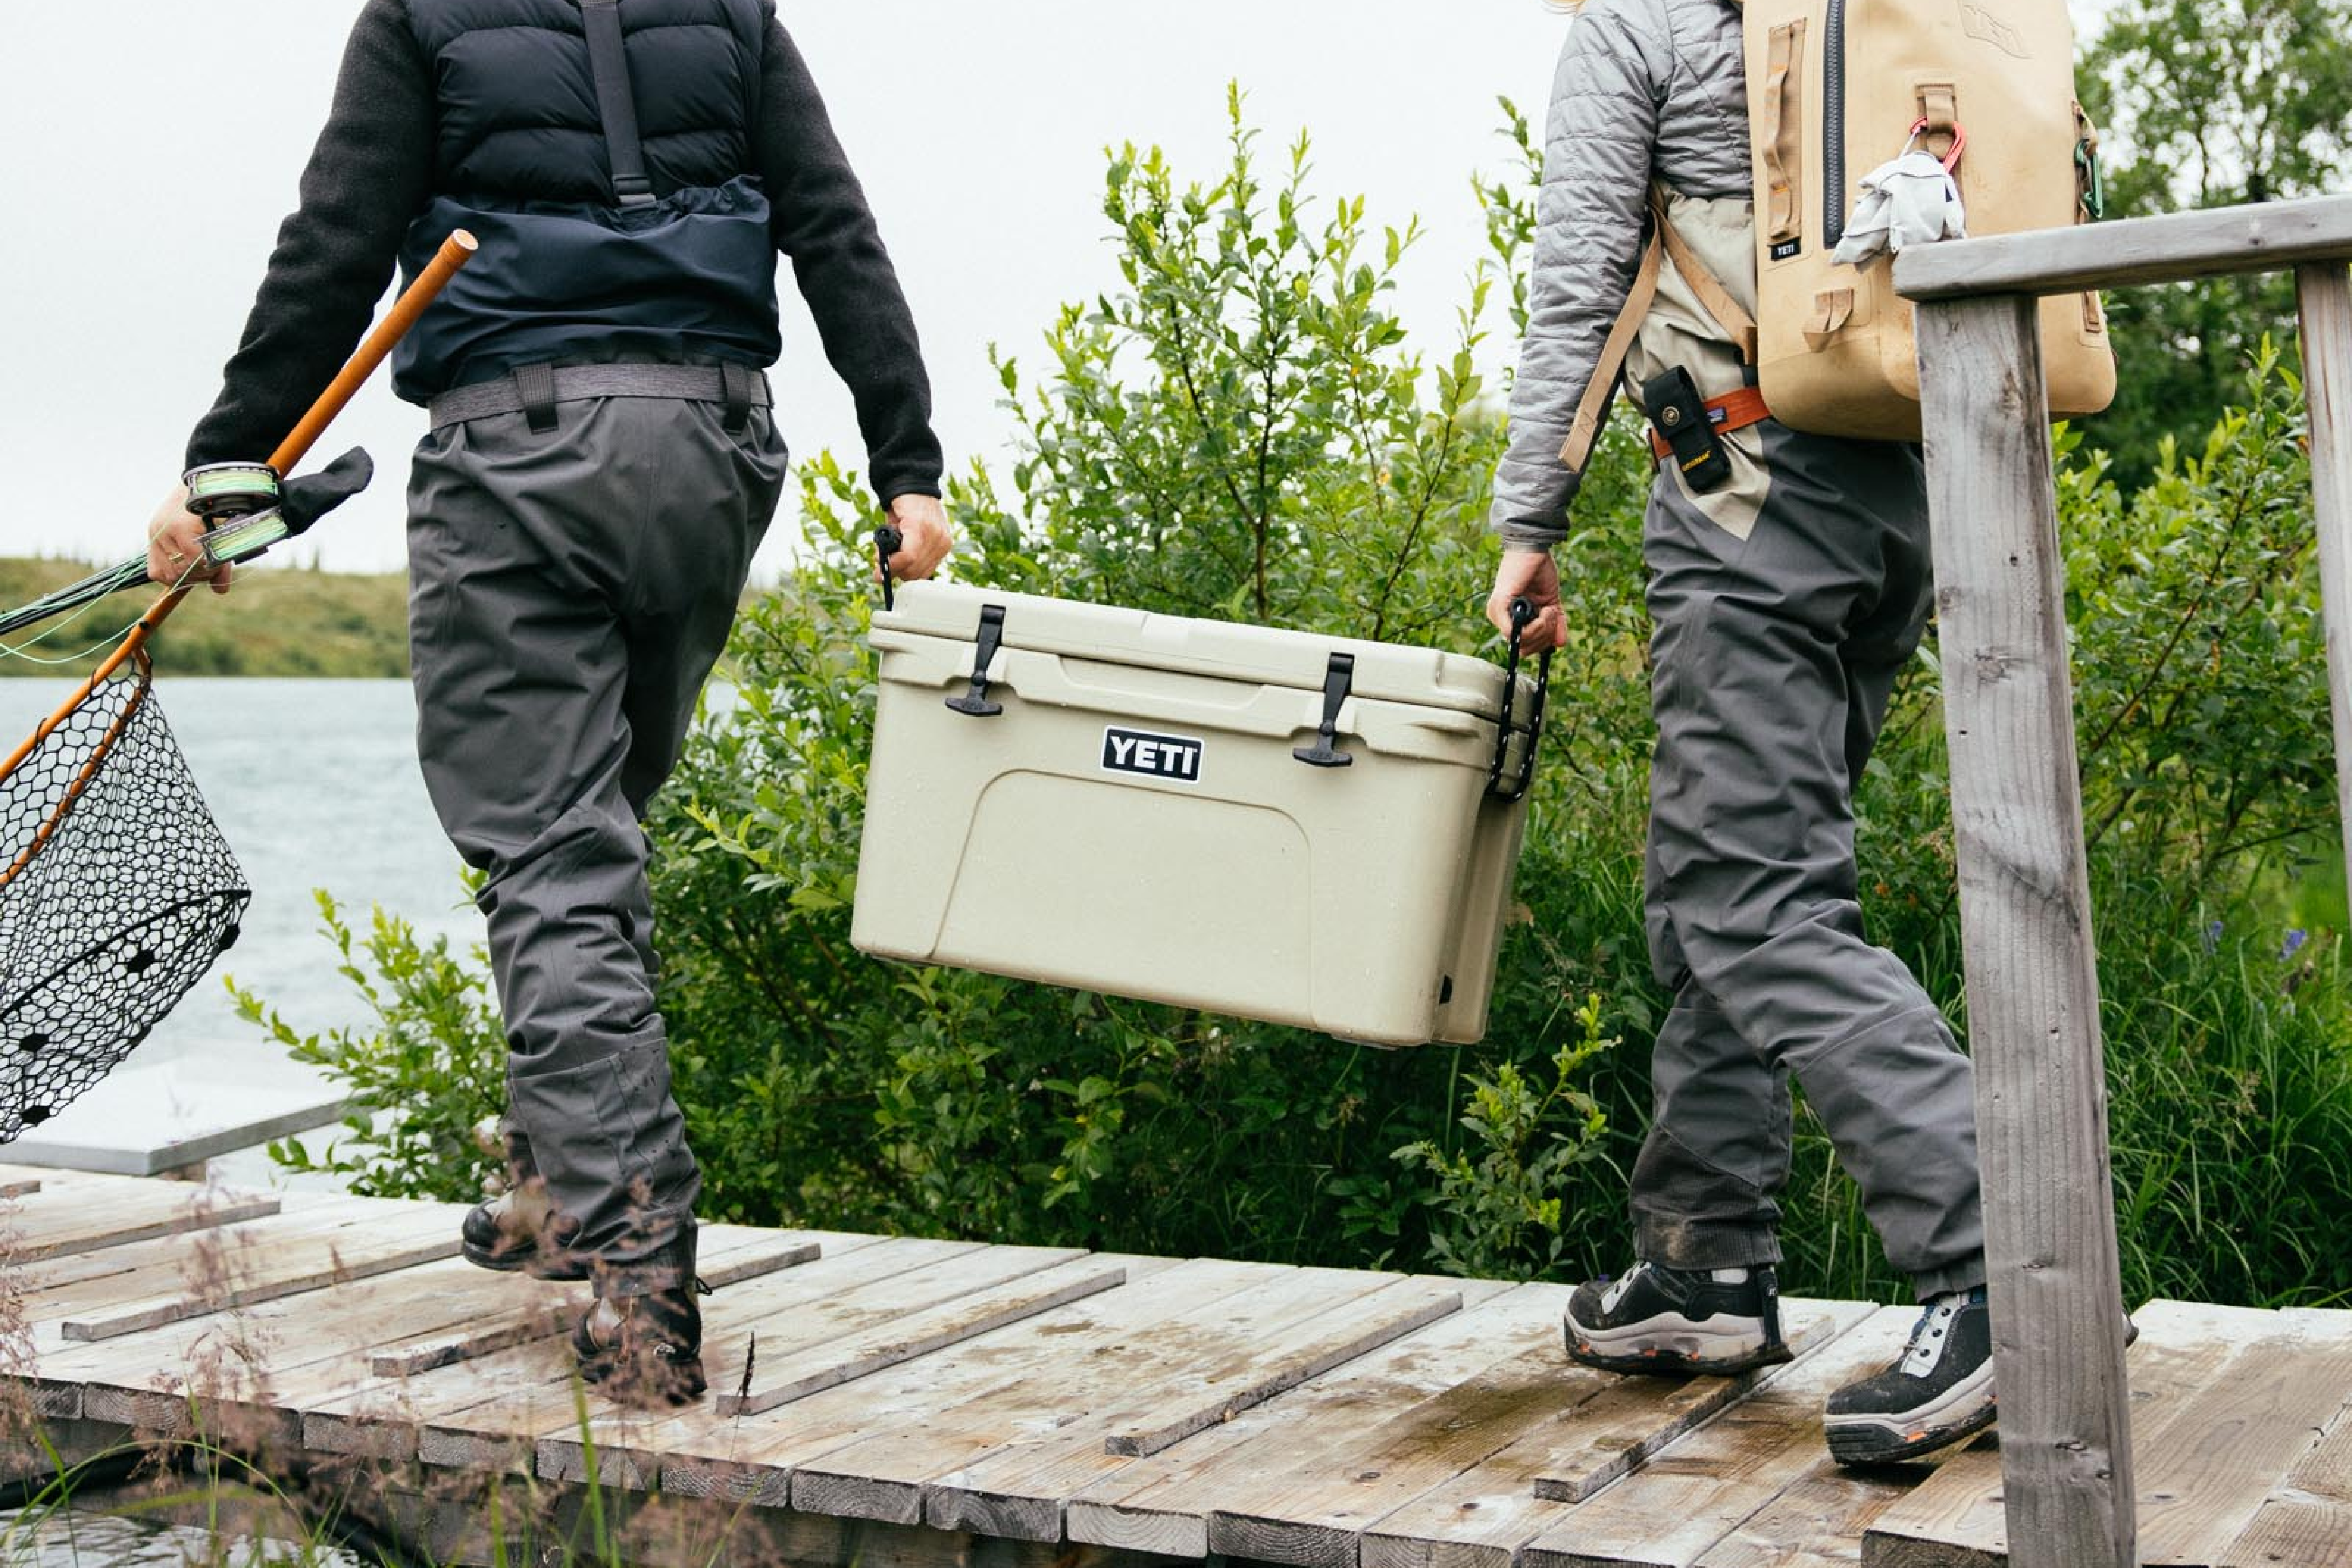 Yeti Coolers and Accessories - The blog of the gritroutdoors.com